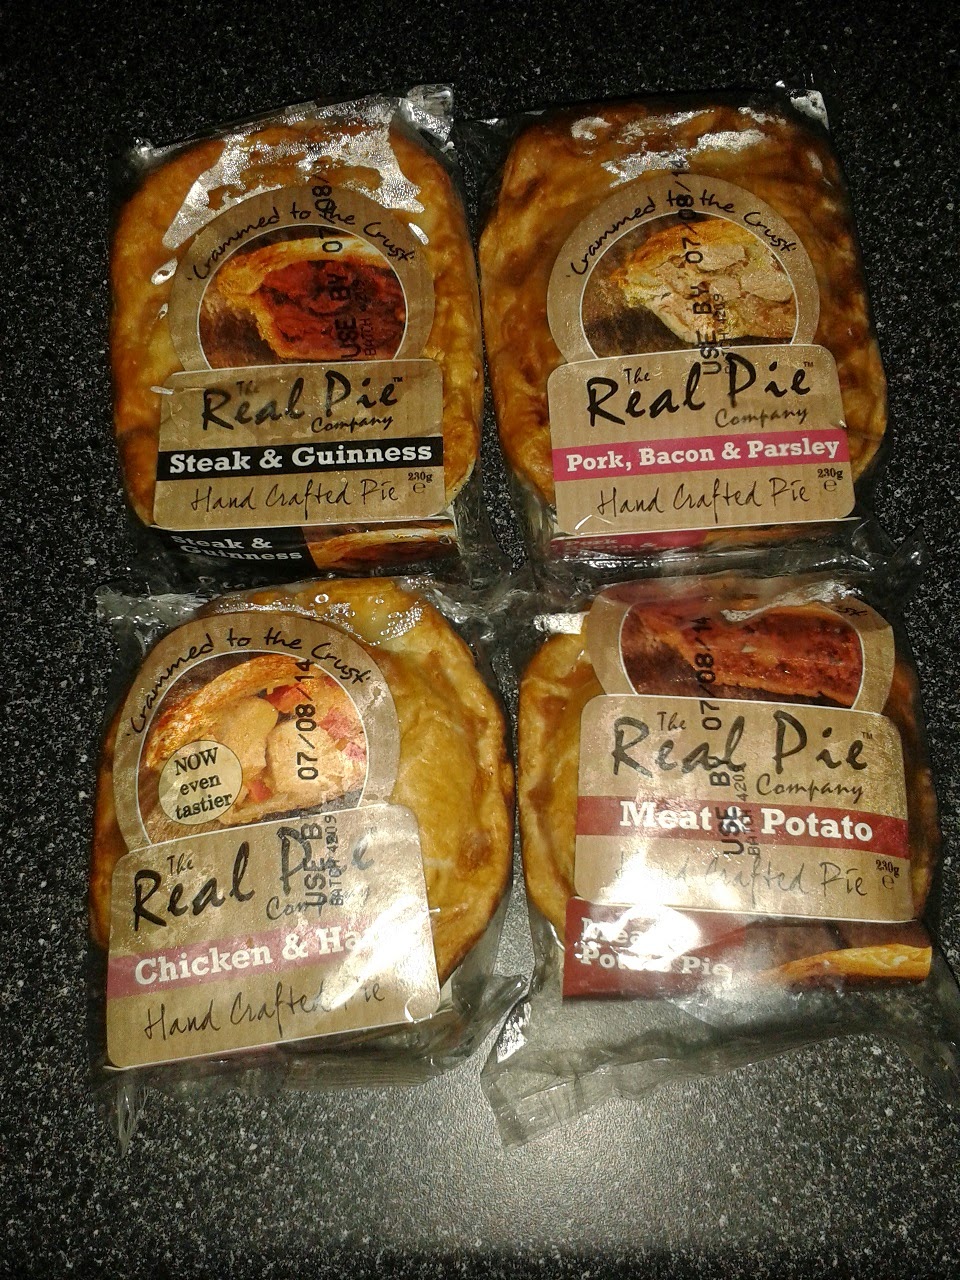 The Real Pie Company Pie Review